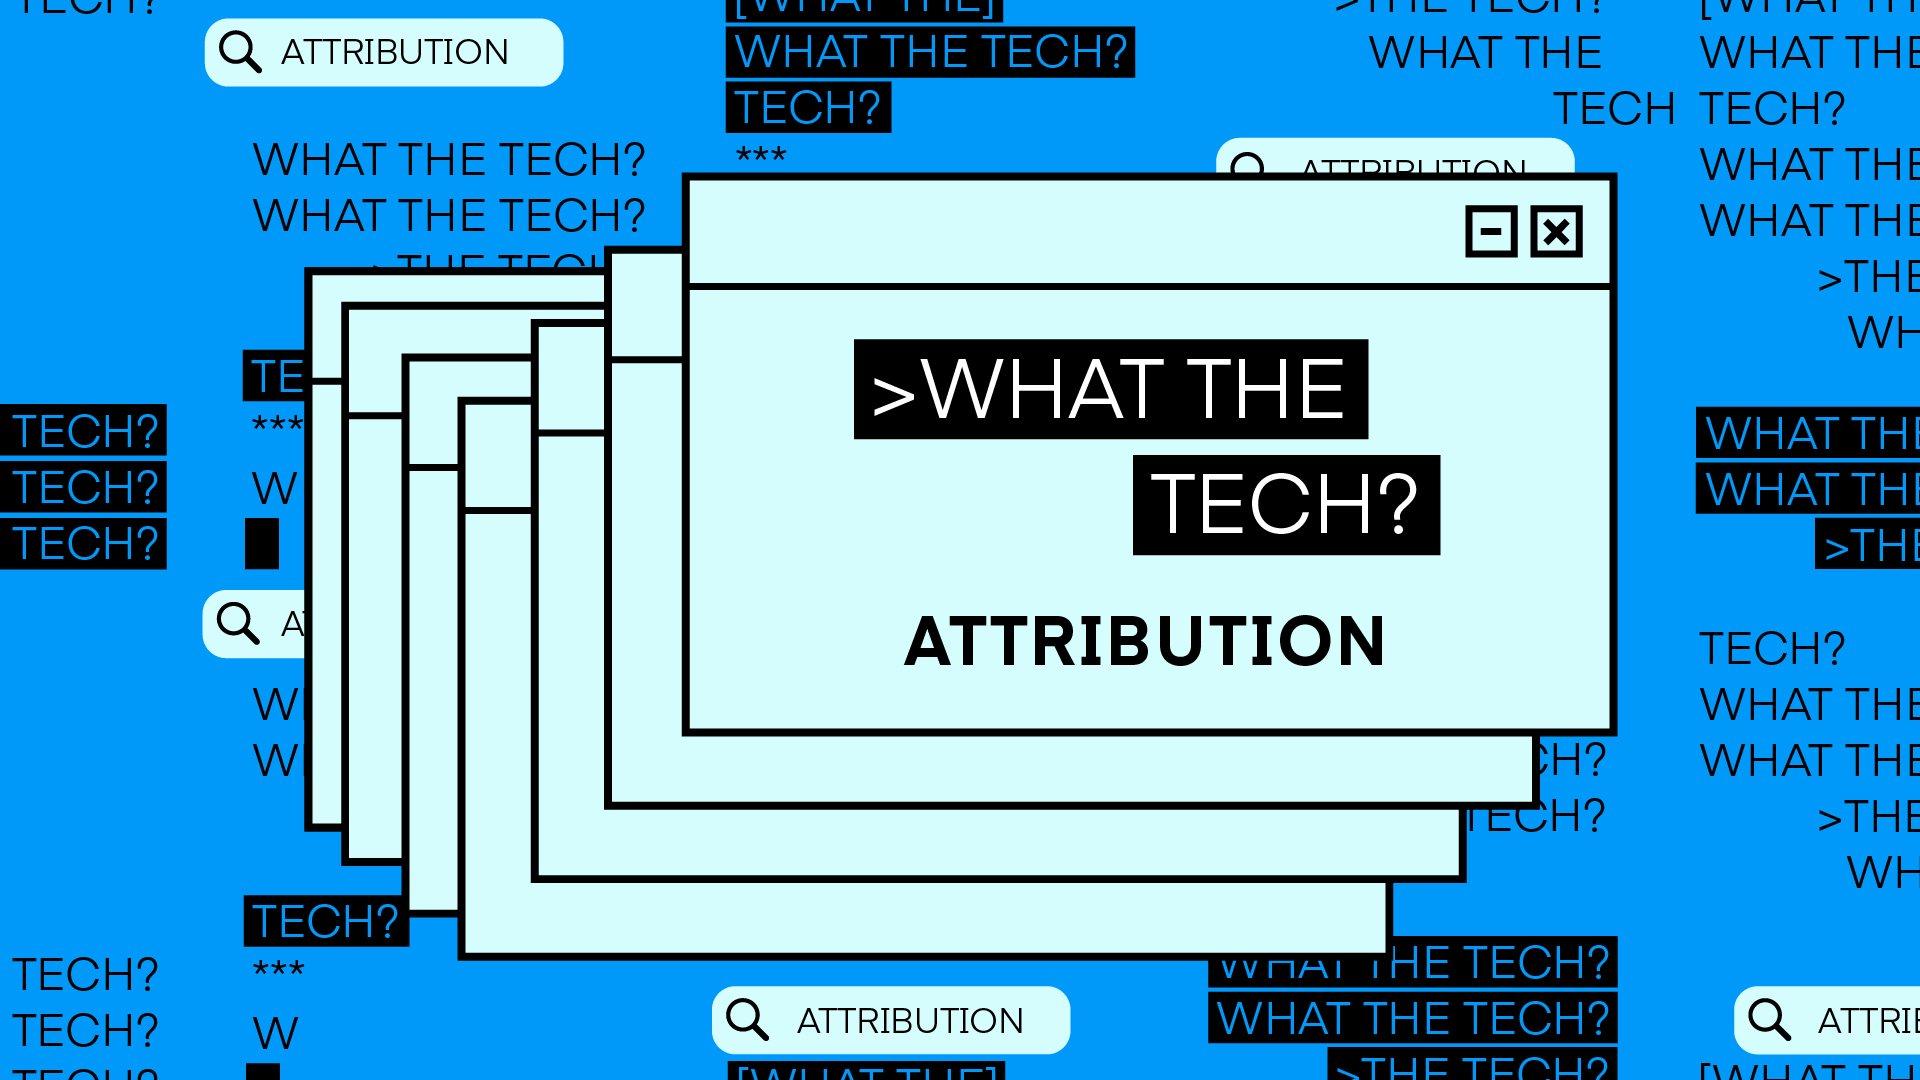 What the Tech is attribution?